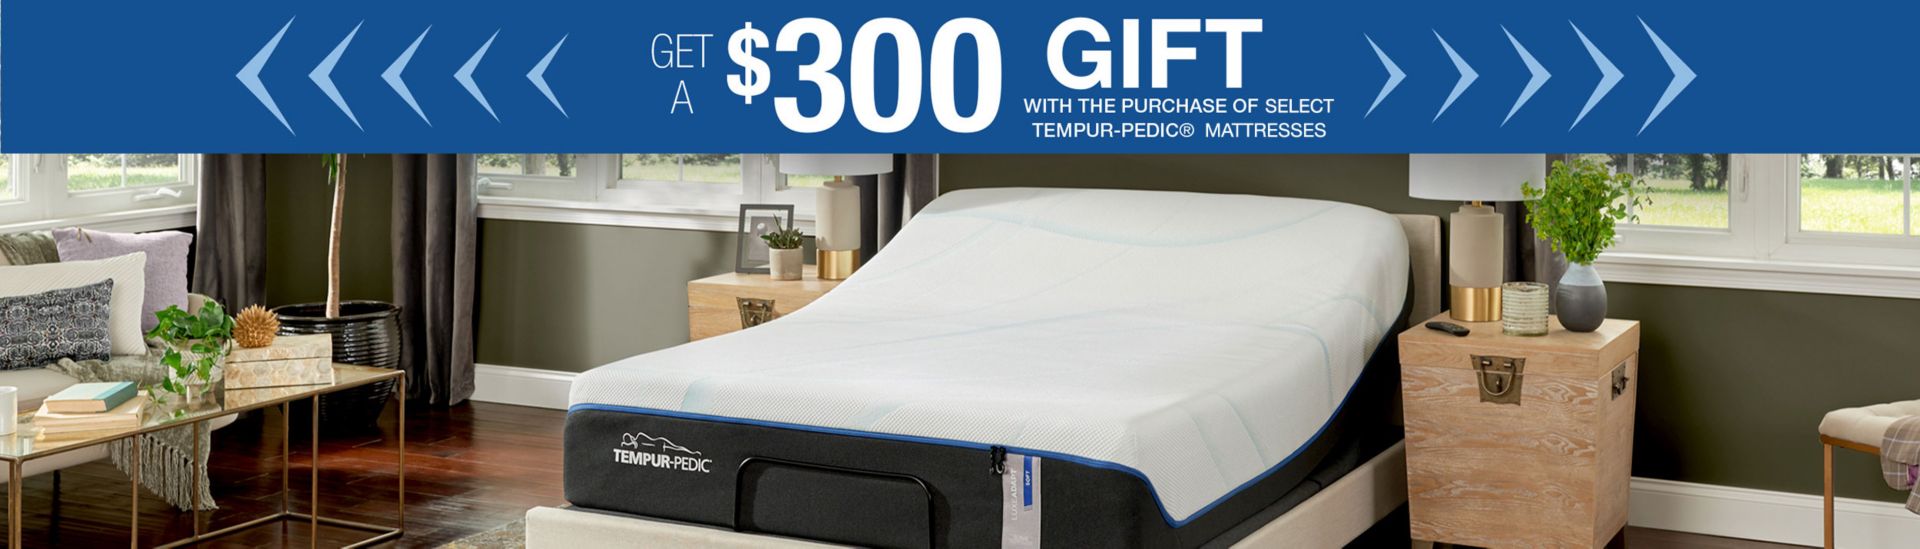 $300 Gift With Purchase of a New Temper-Pedic Mattress